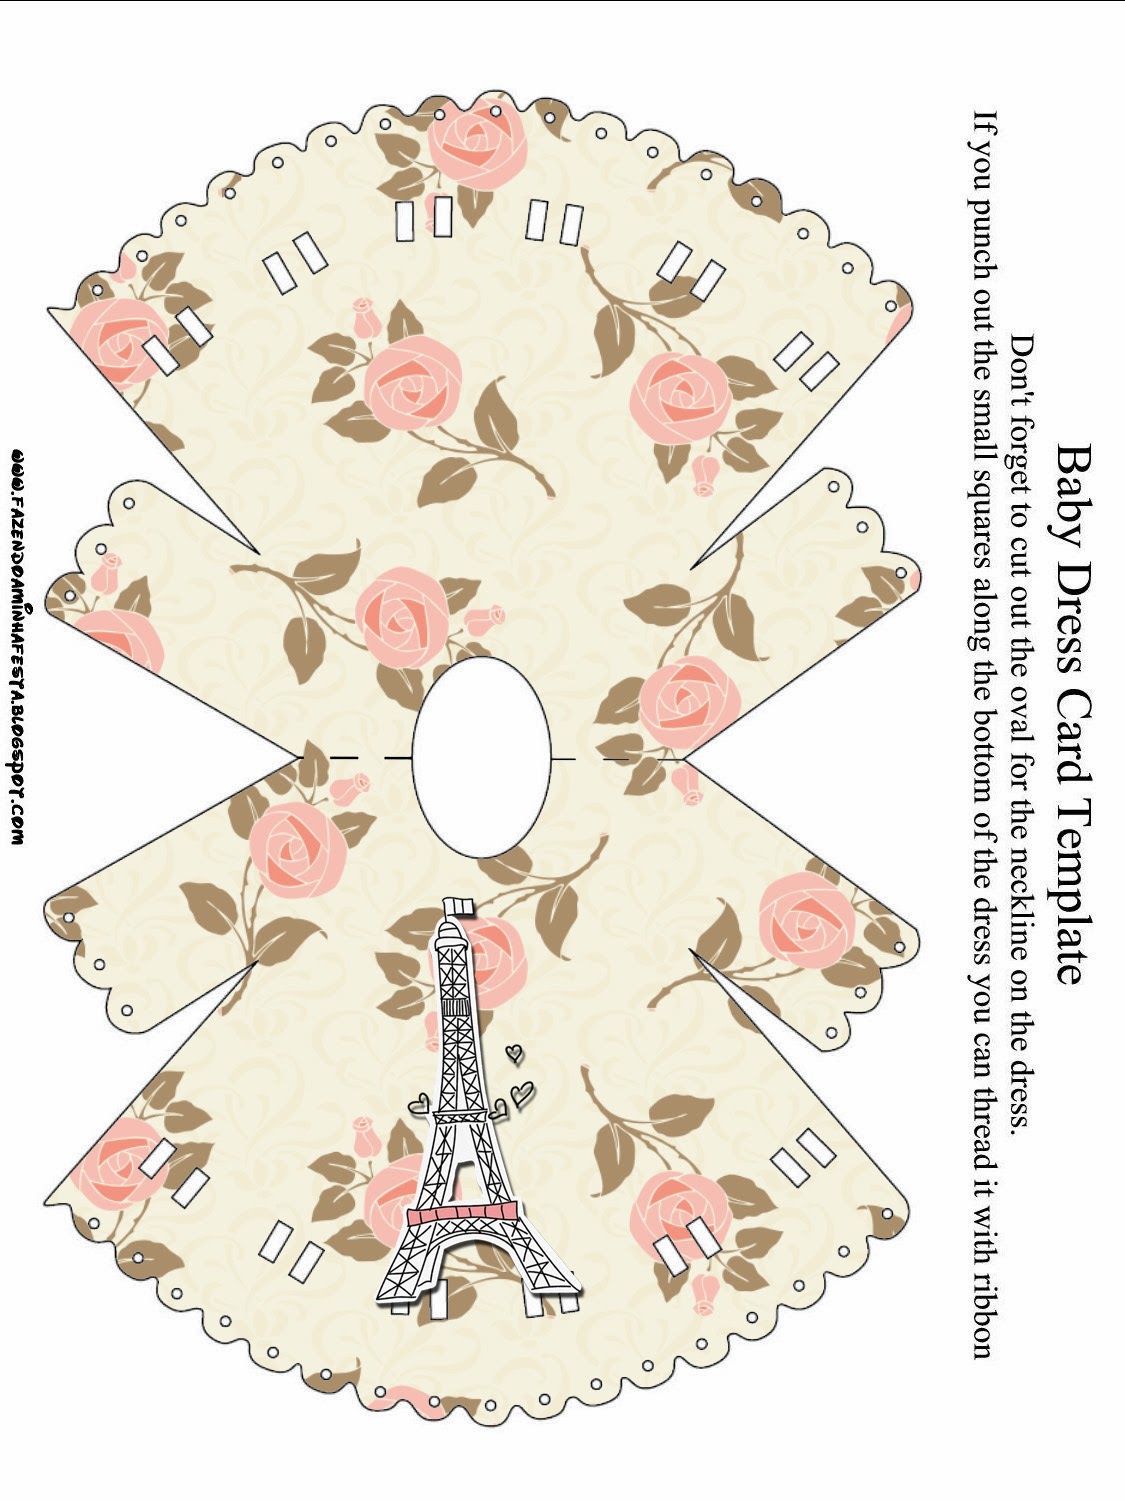 paris-with-roses-free-printable-cards-or-invitations-oh-my-fiesta